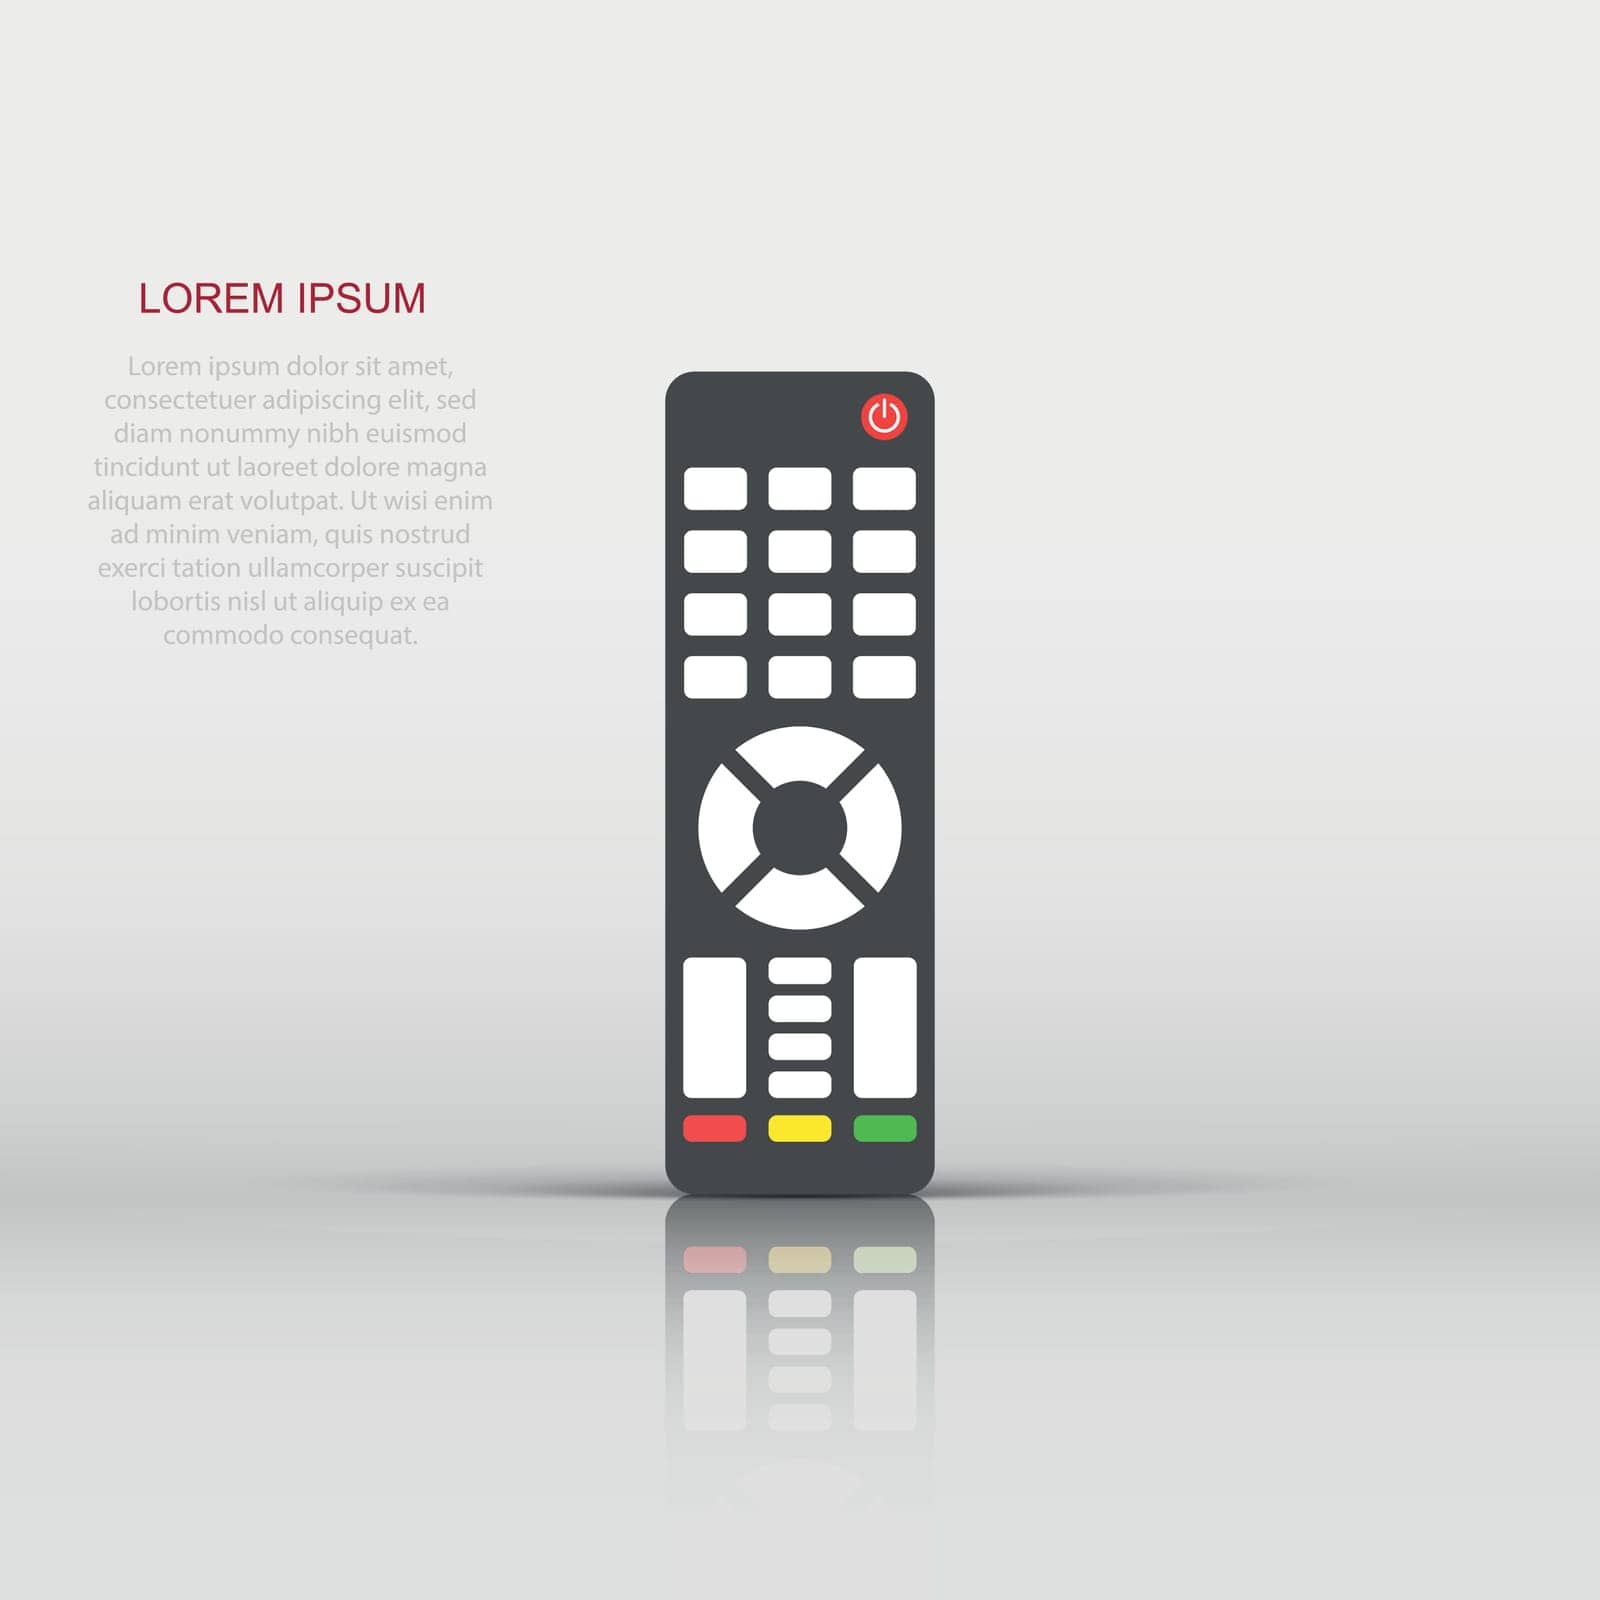 Remote control icon in flat style. Infrared controller vector illustration on white isolated background. Tv keypad business concept.